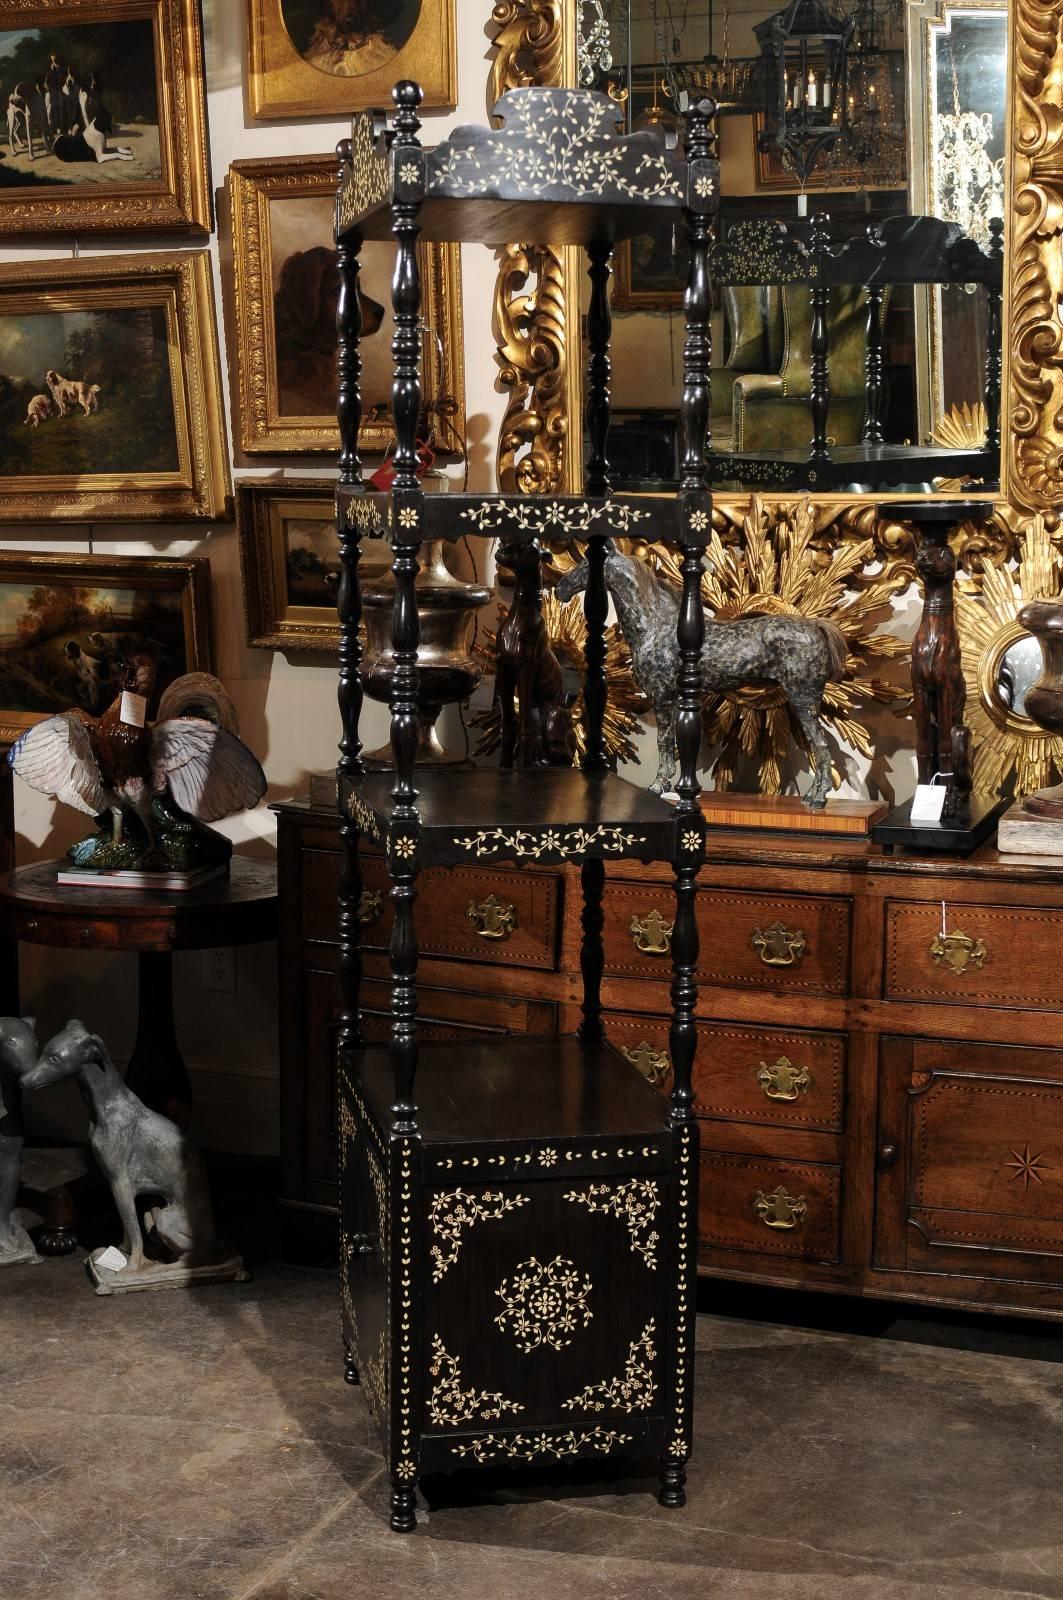 This delicate ebonized wood etagère / trolley from the early 19th century features a carved top over three open shelves. The fully enclosed lower section is accessed by two doors that open to reveal a nice storage compartment. The top and shelves